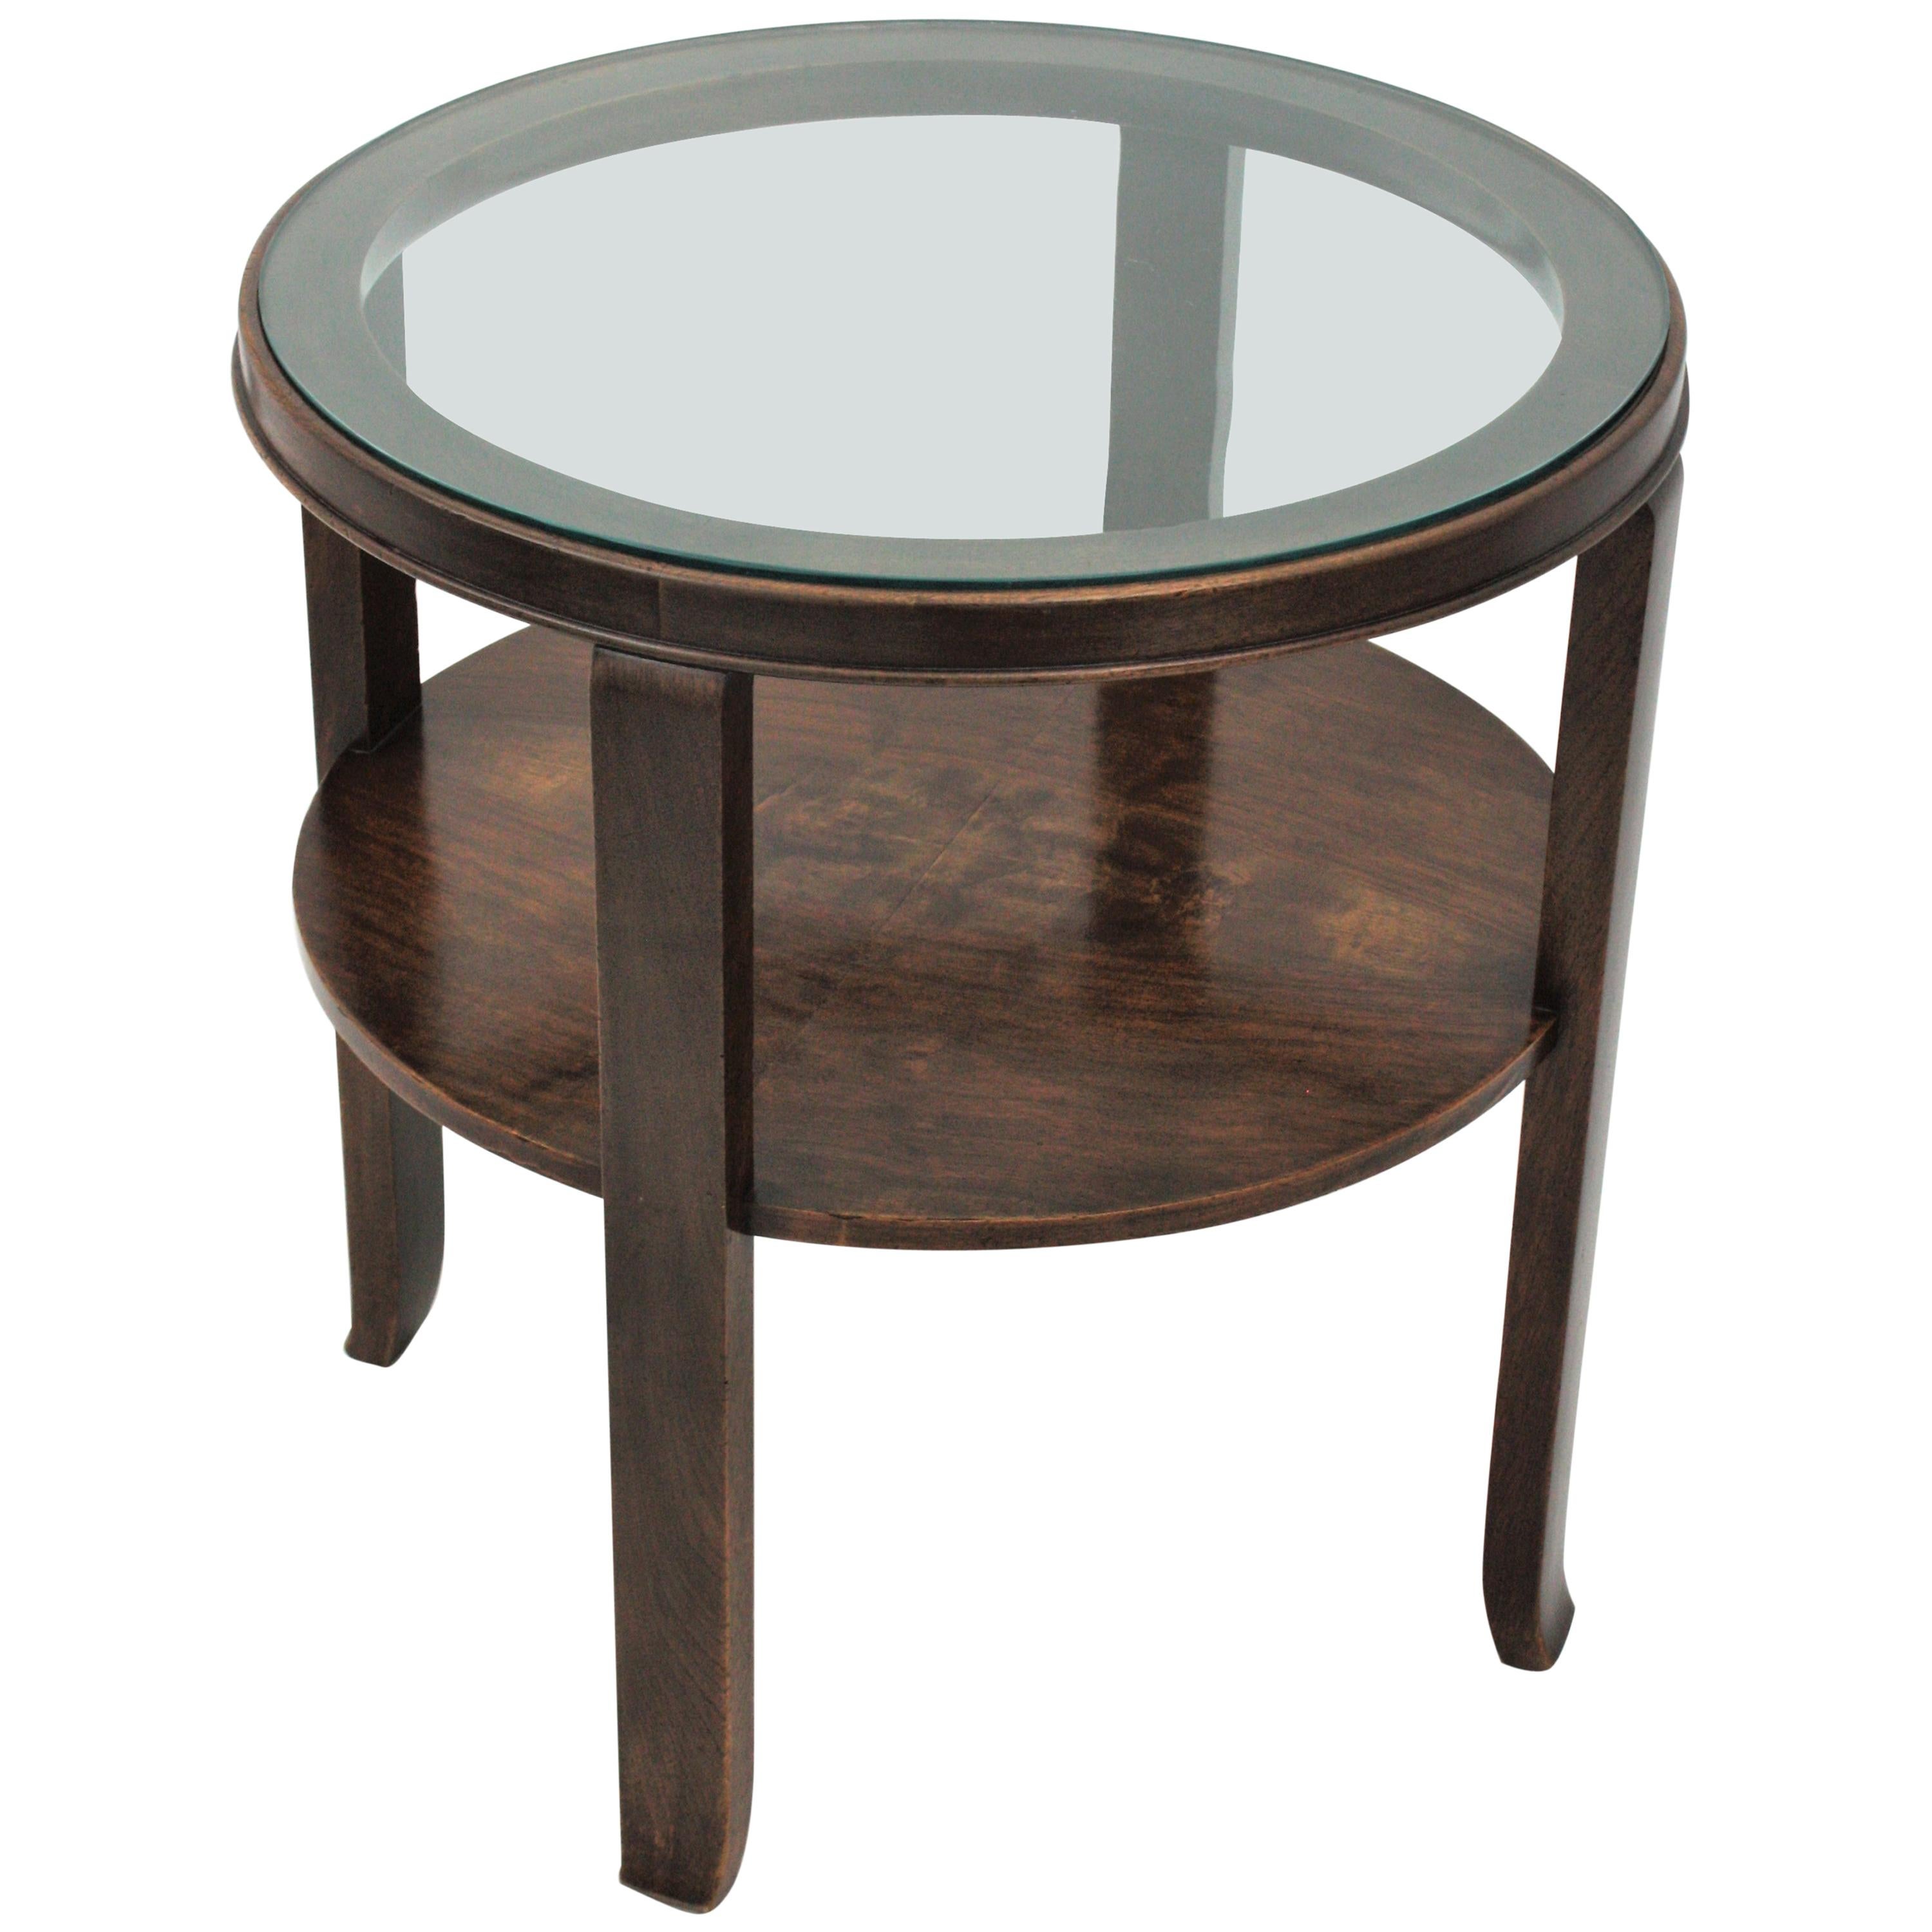 Art Deco Two-Tier Walnut Round Side Table with Glass Top, France, 1930s